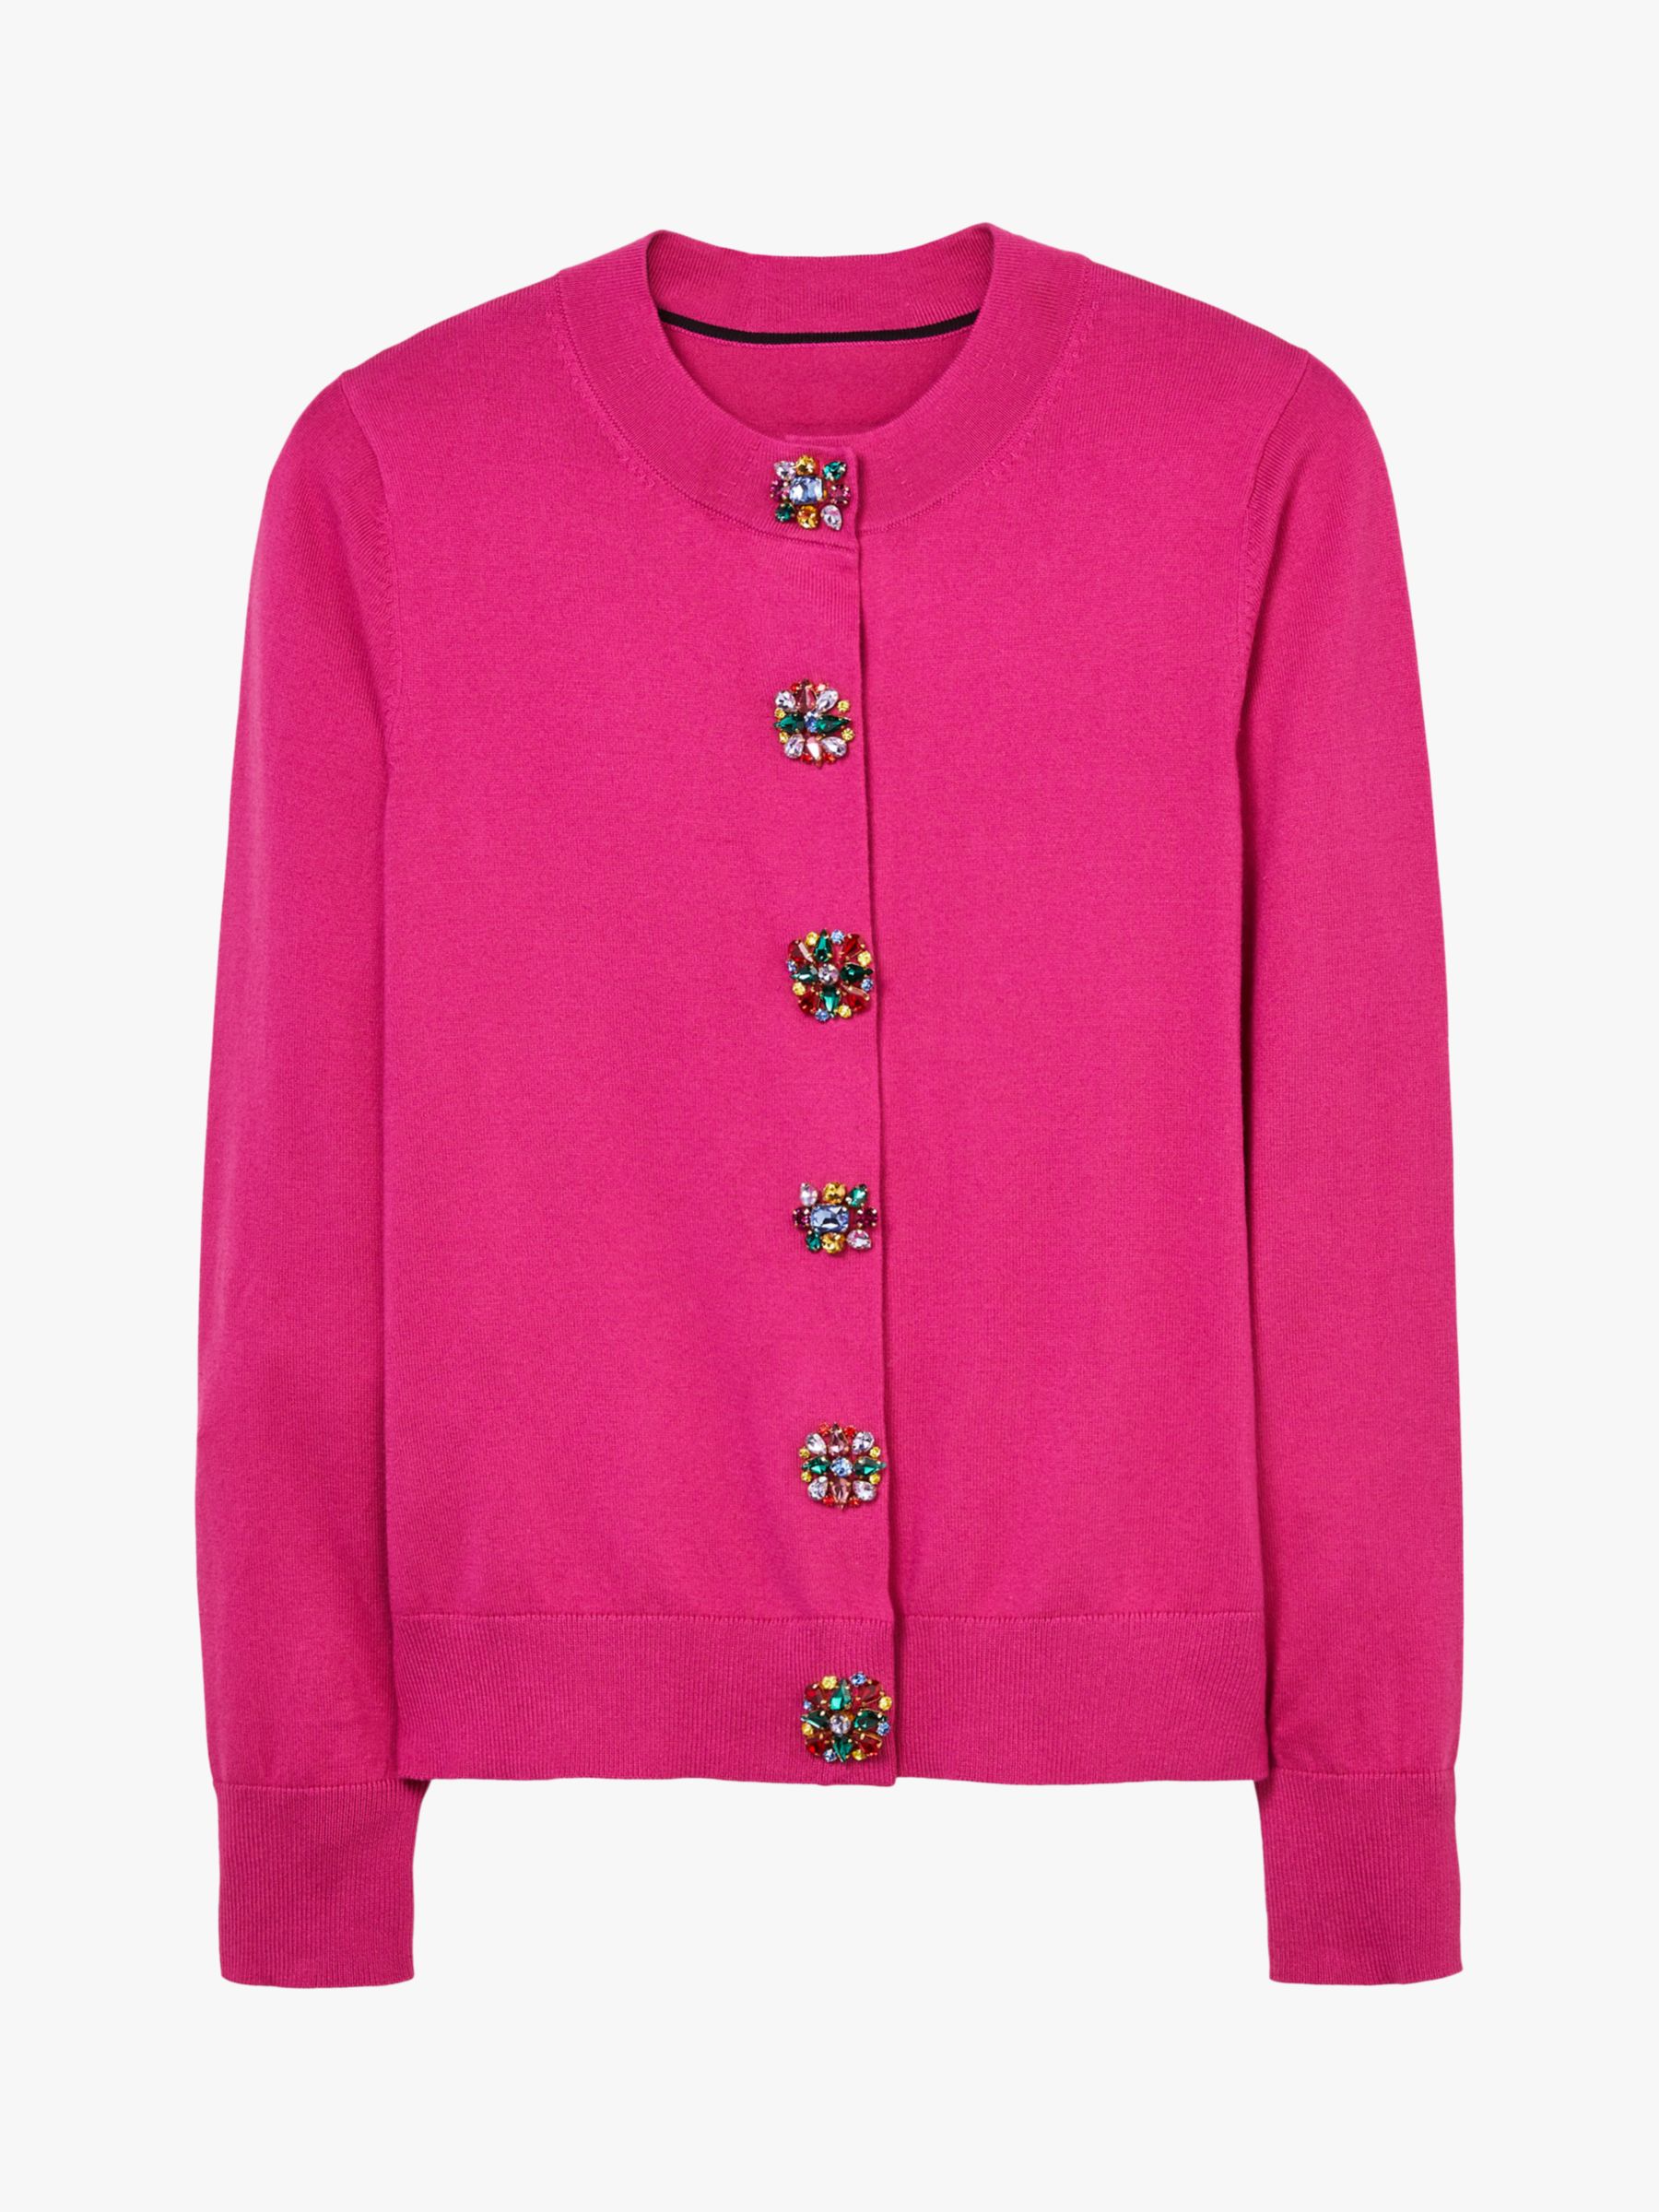 Boden Howe Embellished Button Cardigan, Pink Flambe